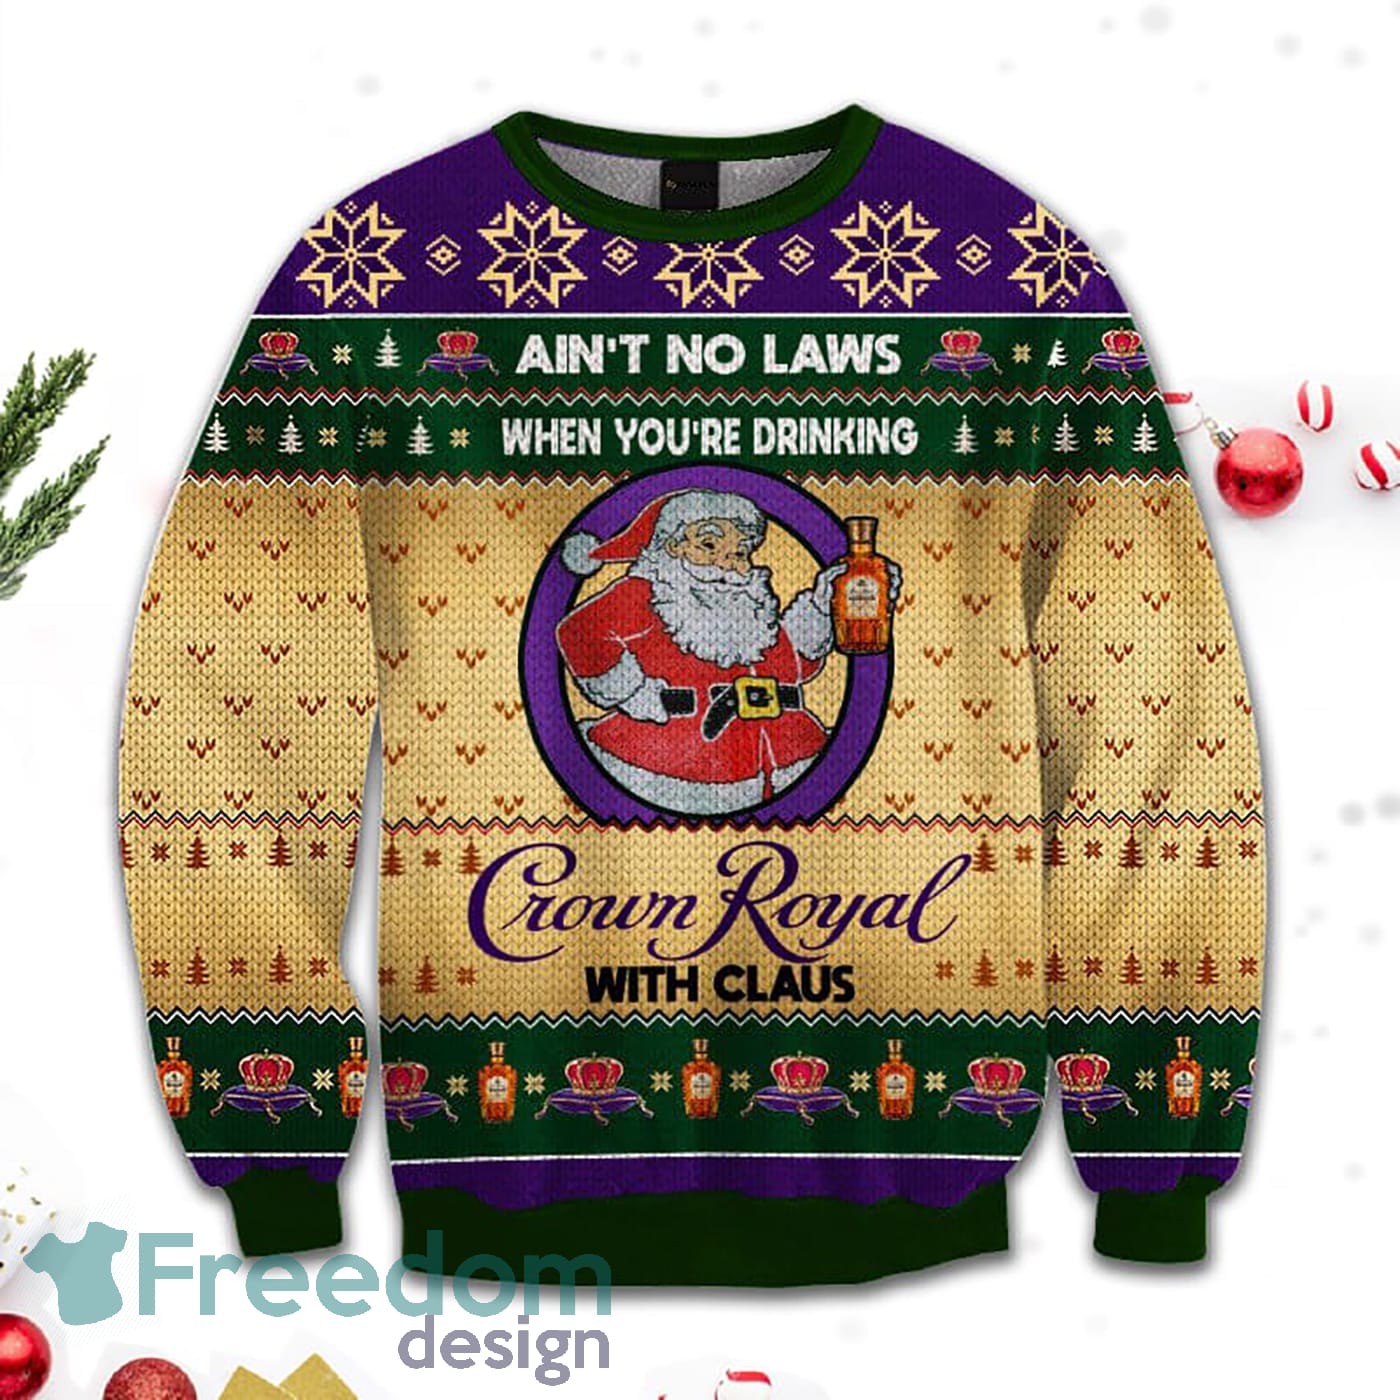 Merr Christmas Ain't No Laws When You Drink Crown Royal With Claus Sweatshirt